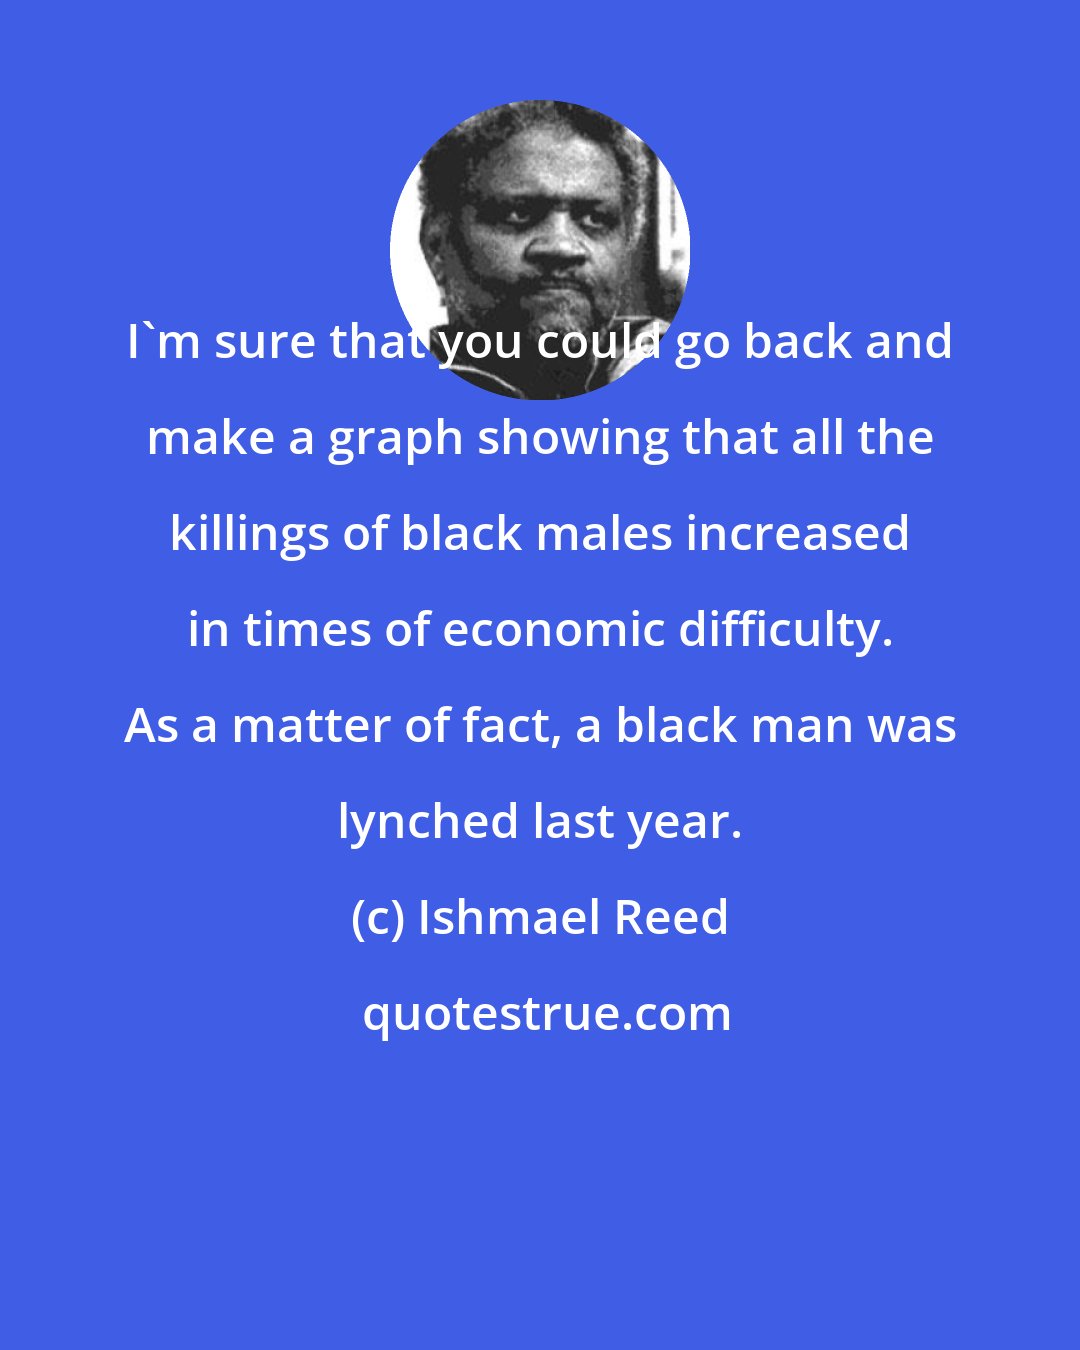 Ishmael Reed: I'm sure that you could go back and make a graph showing that all the killings of black males increased in times of economic difficulty. As a matter of fact, a black man was lynched last year.